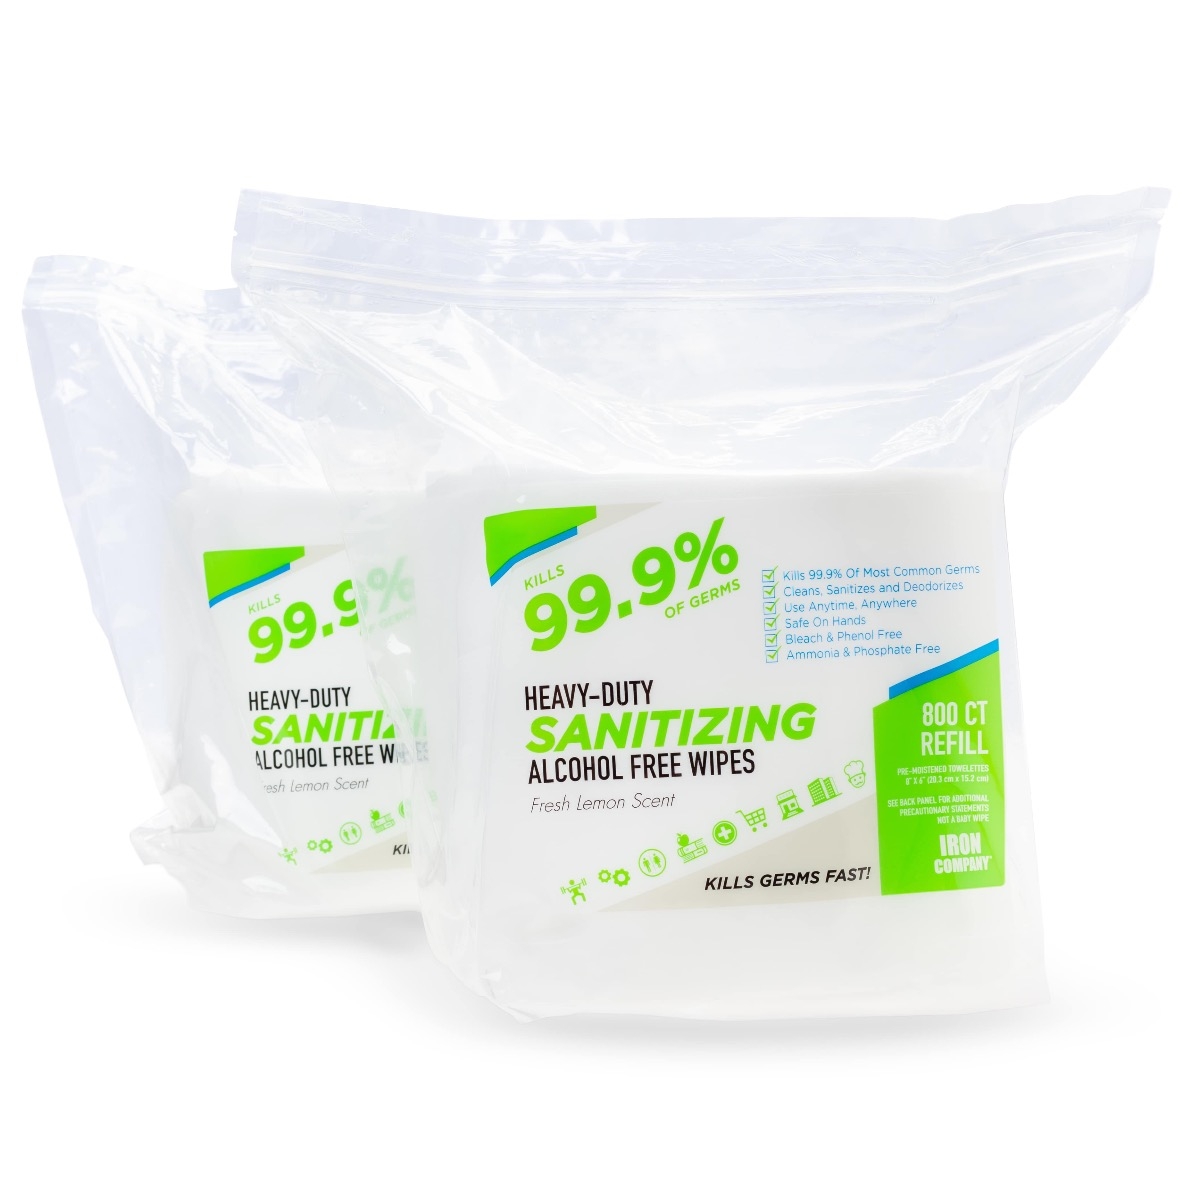 Best Sanitizing Wipes For Gyms, Schools, Military, Police, Fire, Home and Business